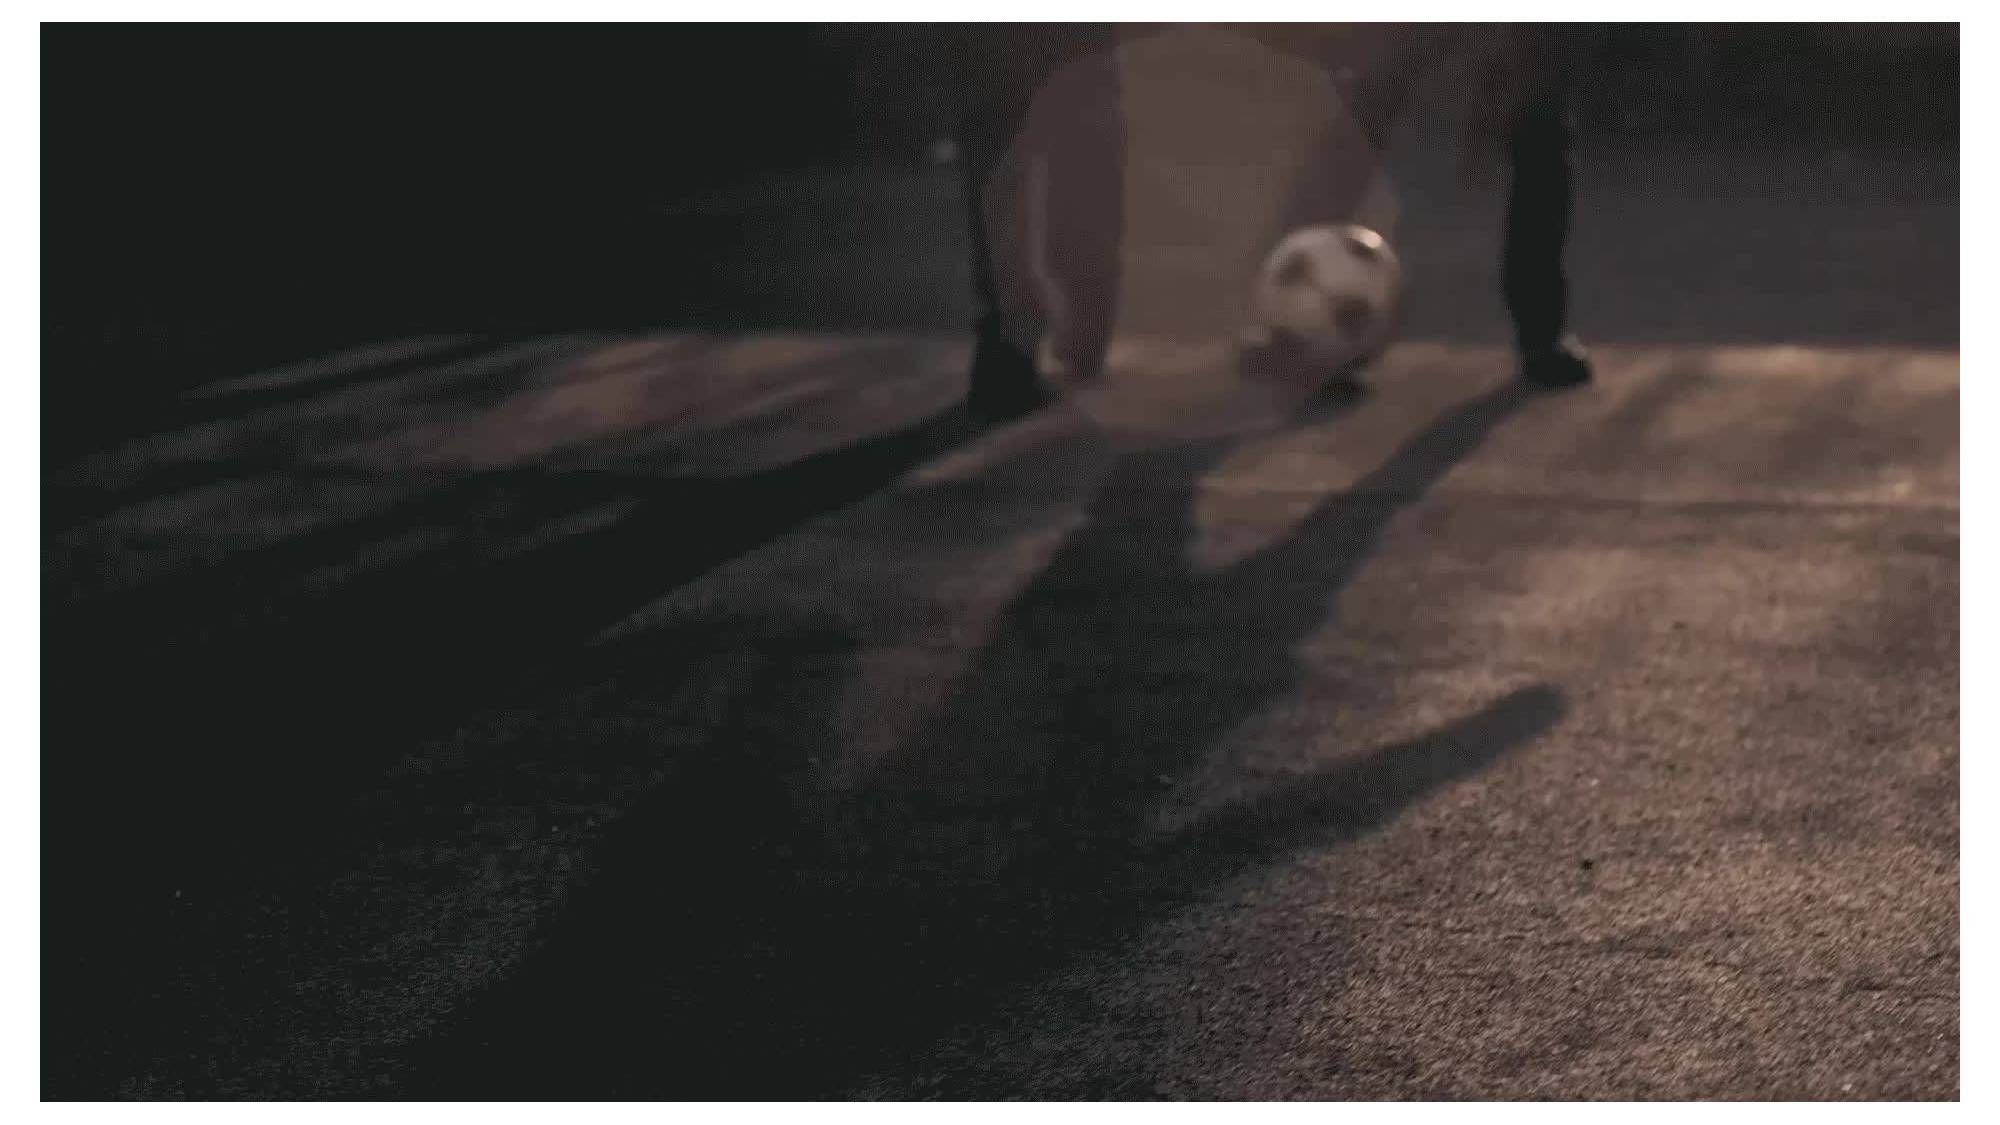 A gif of children playing soccer